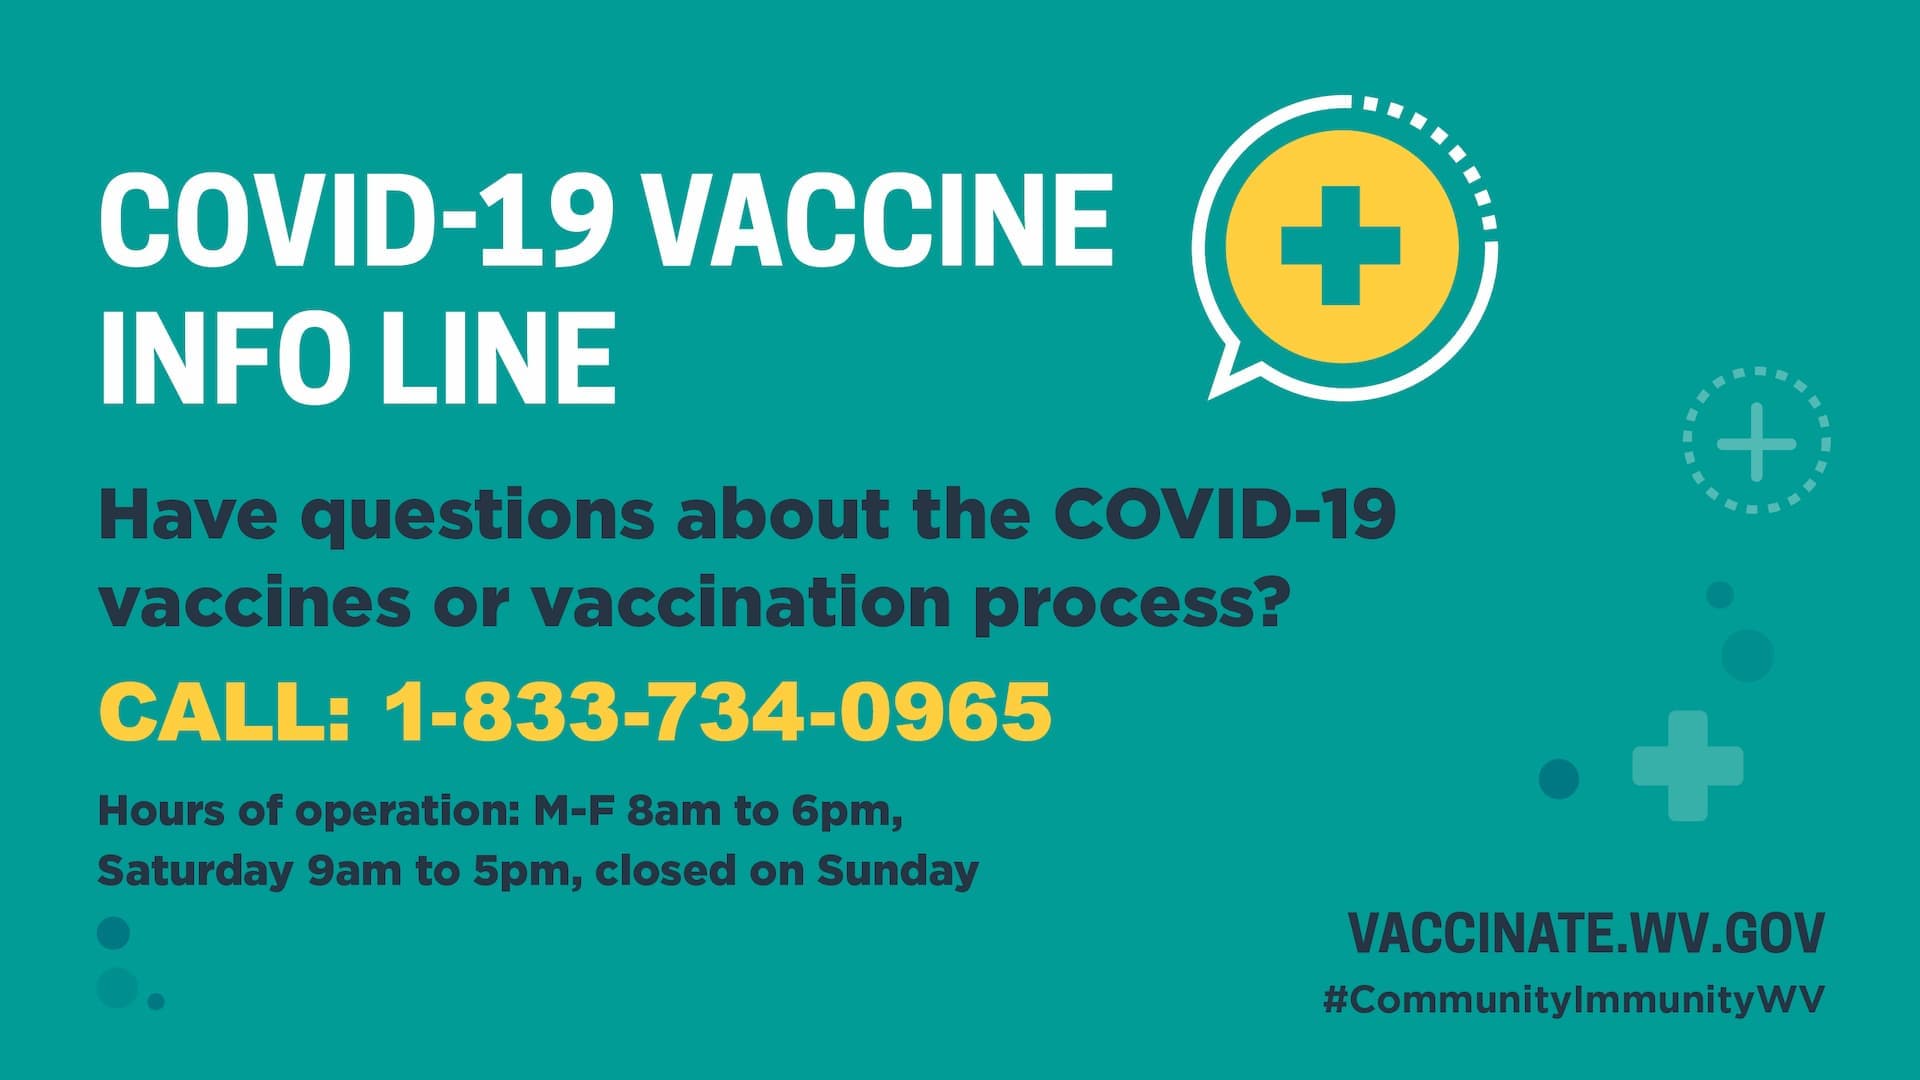 COVID-19 Vaccine Information for West Virginia